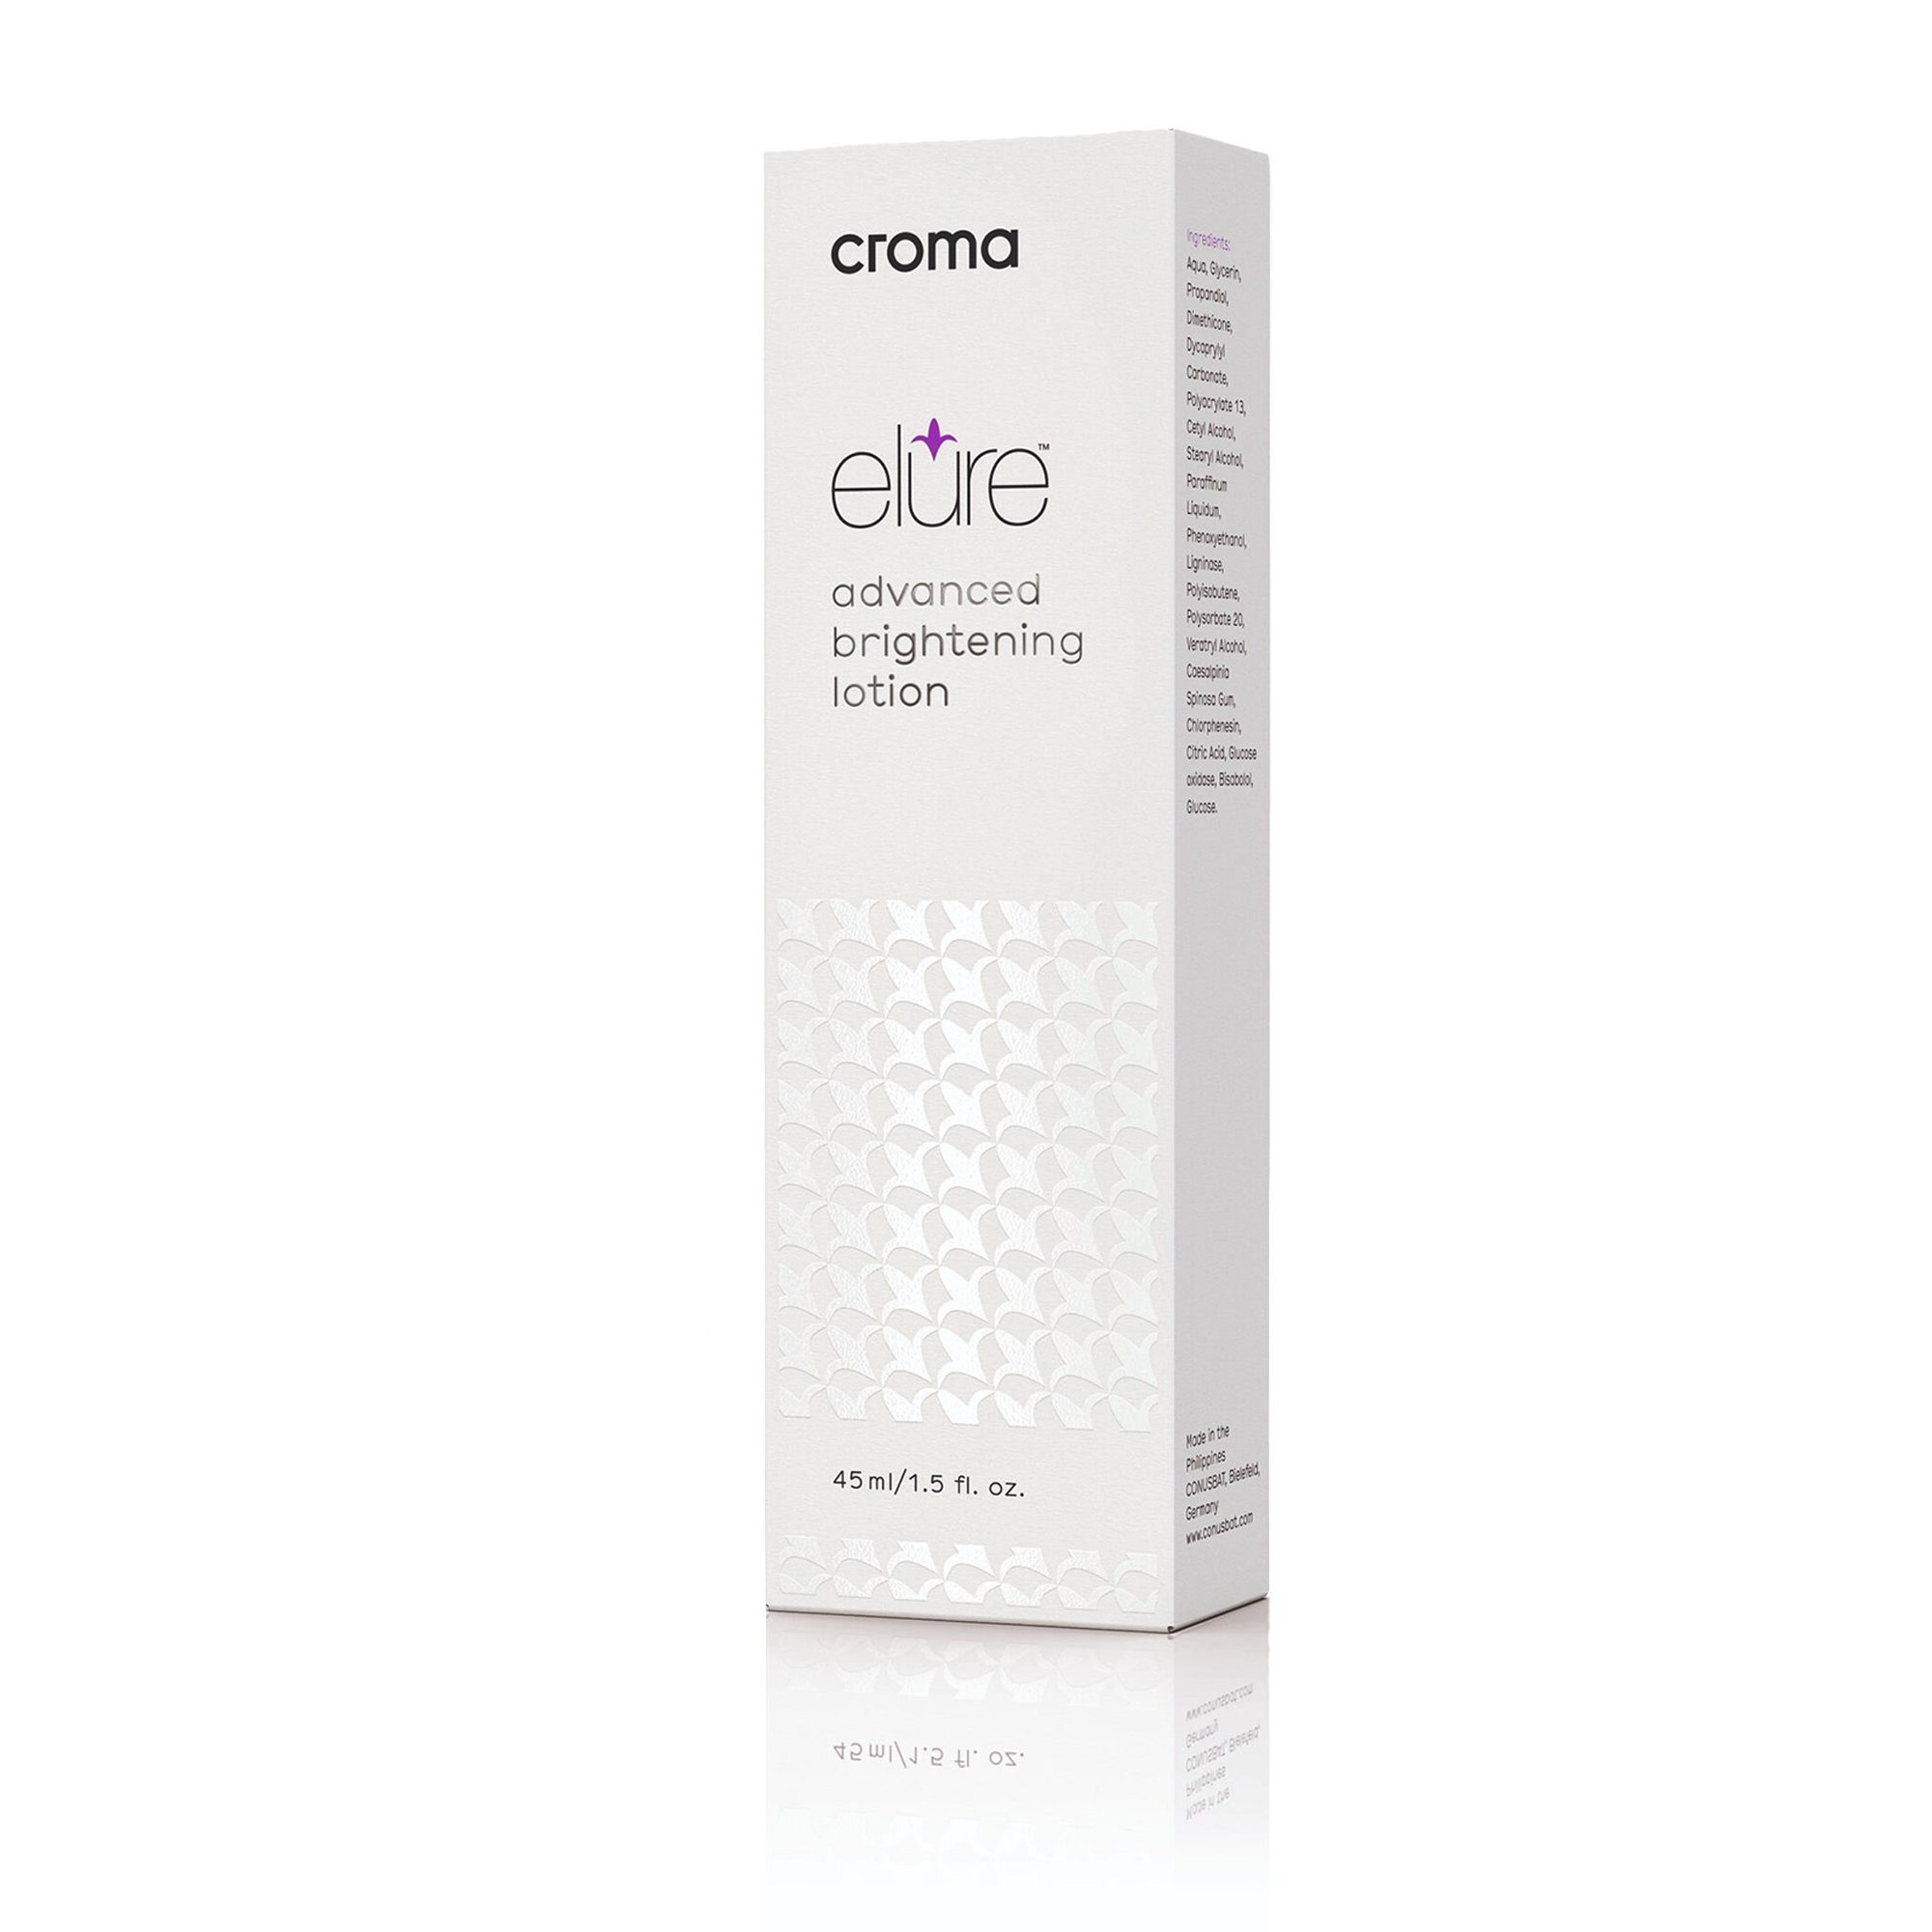 Gesichtslotion Elure Lotion Brightening Croma Packung, Croma 1-tlg. Advanced